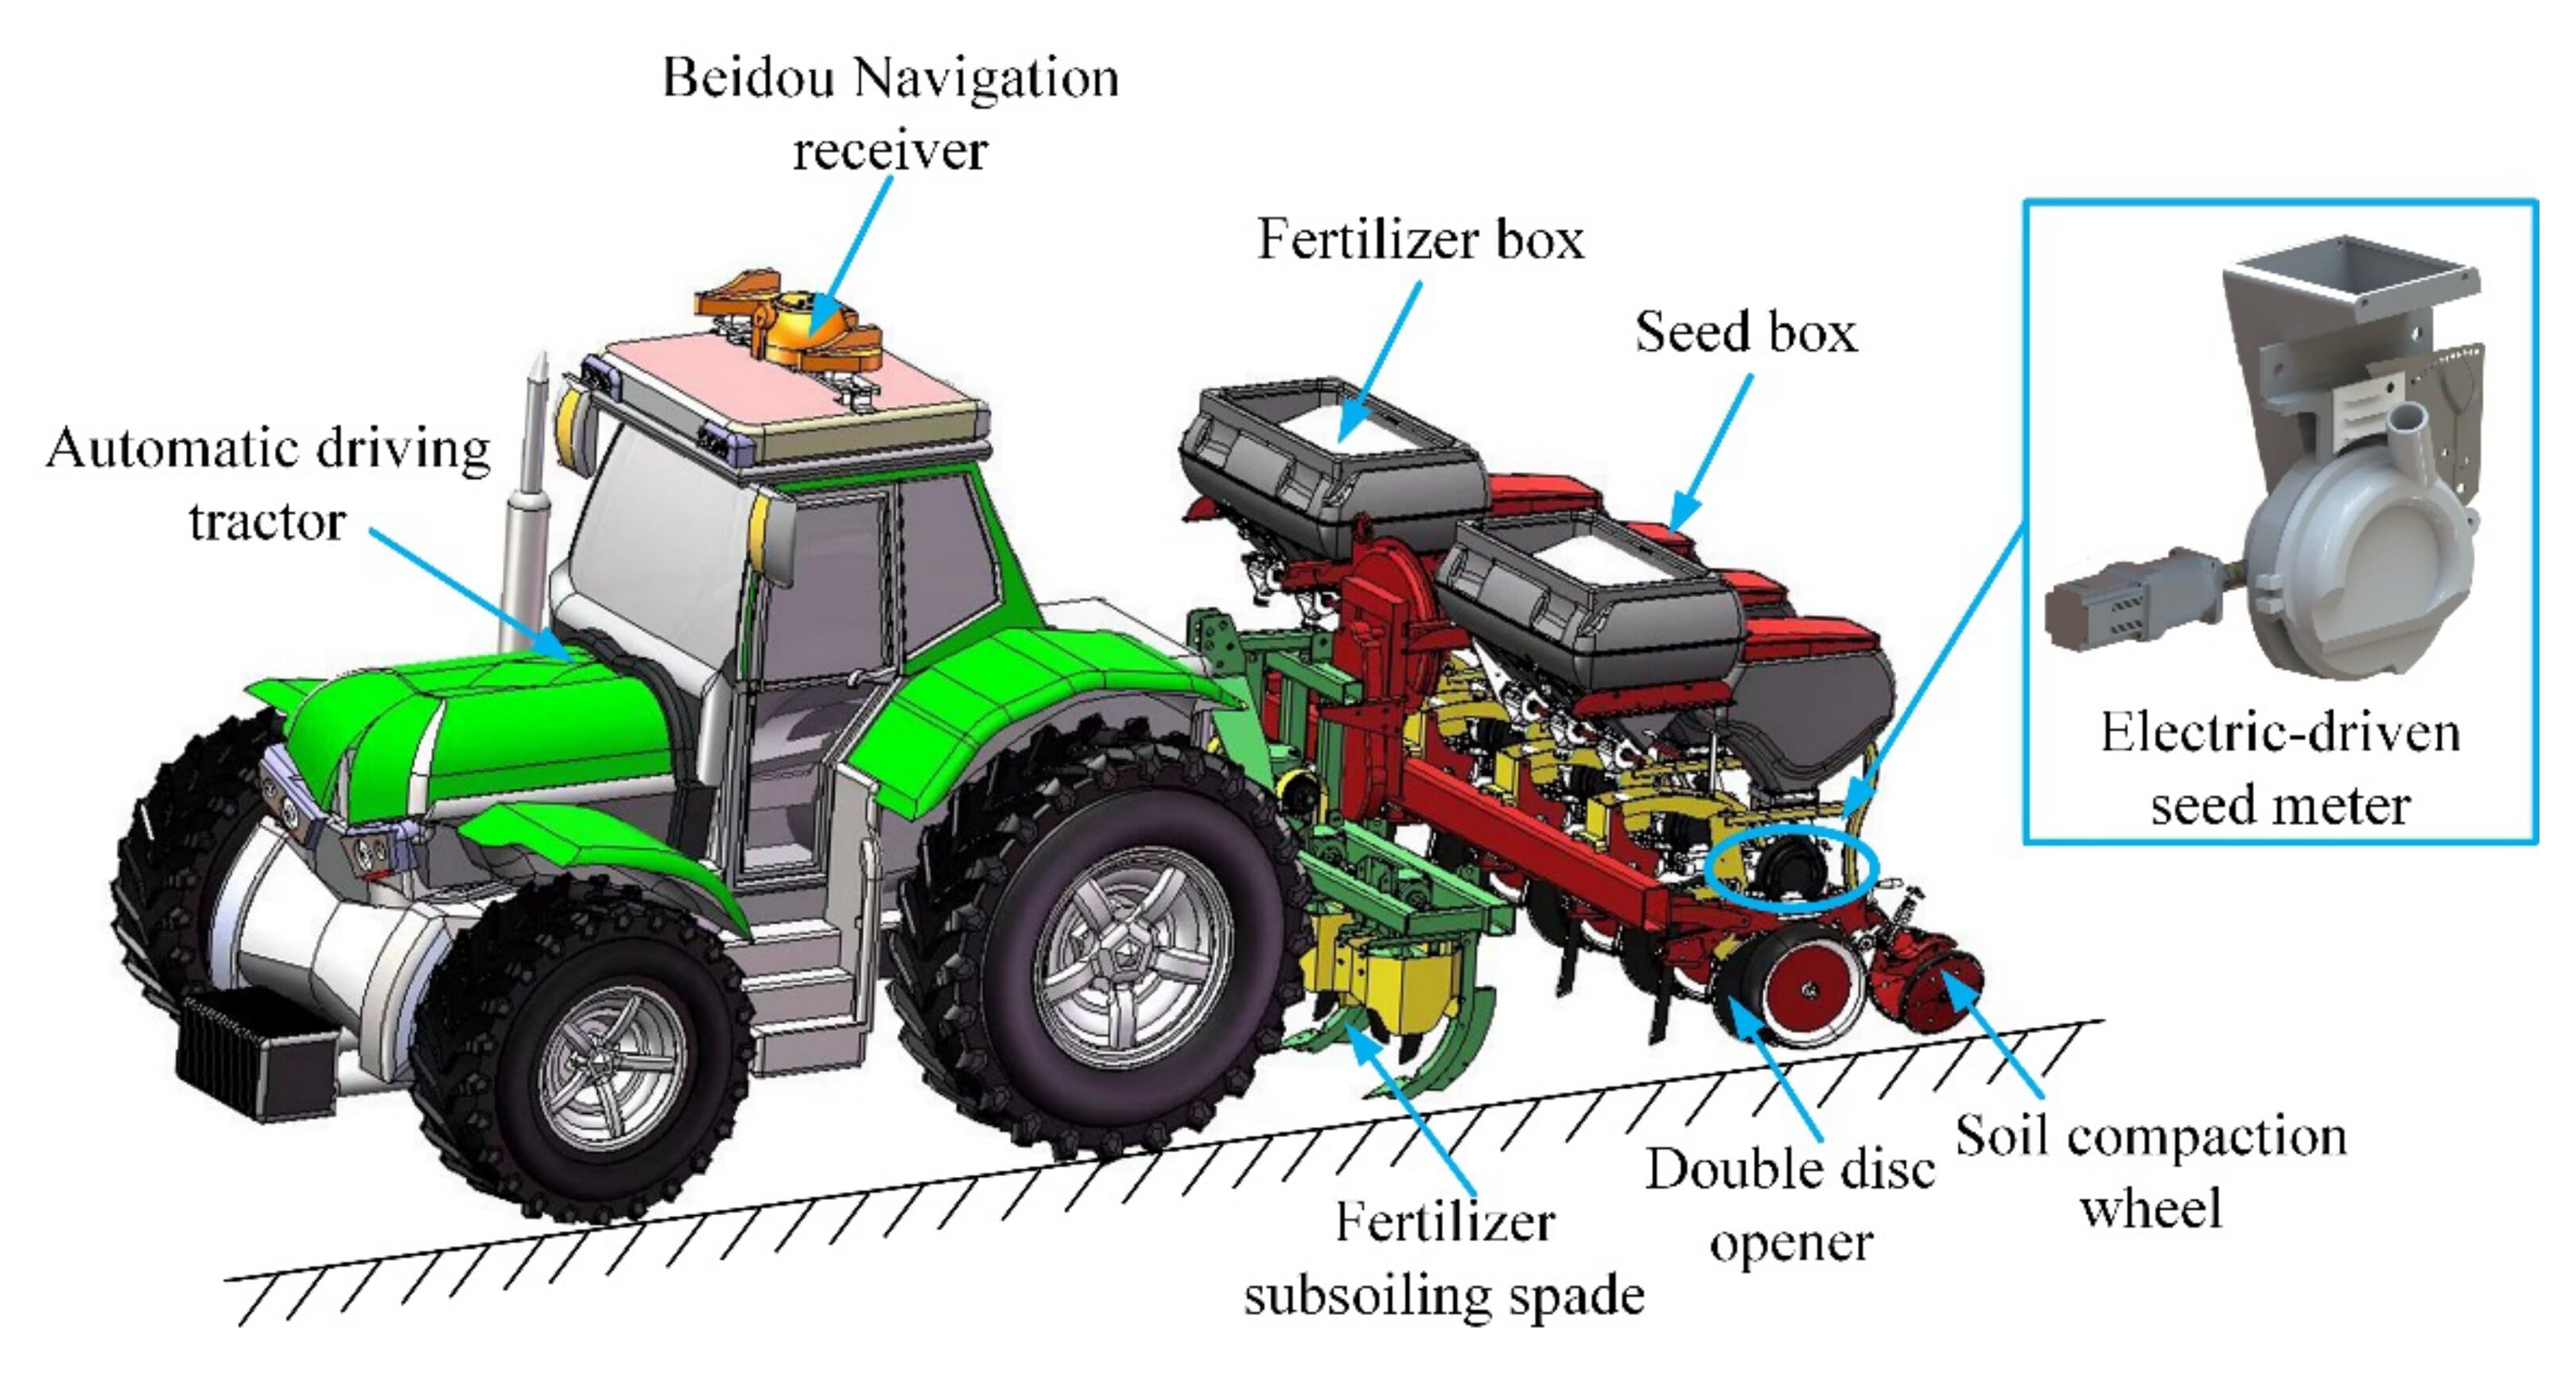 Future Trends in Seed Equipment